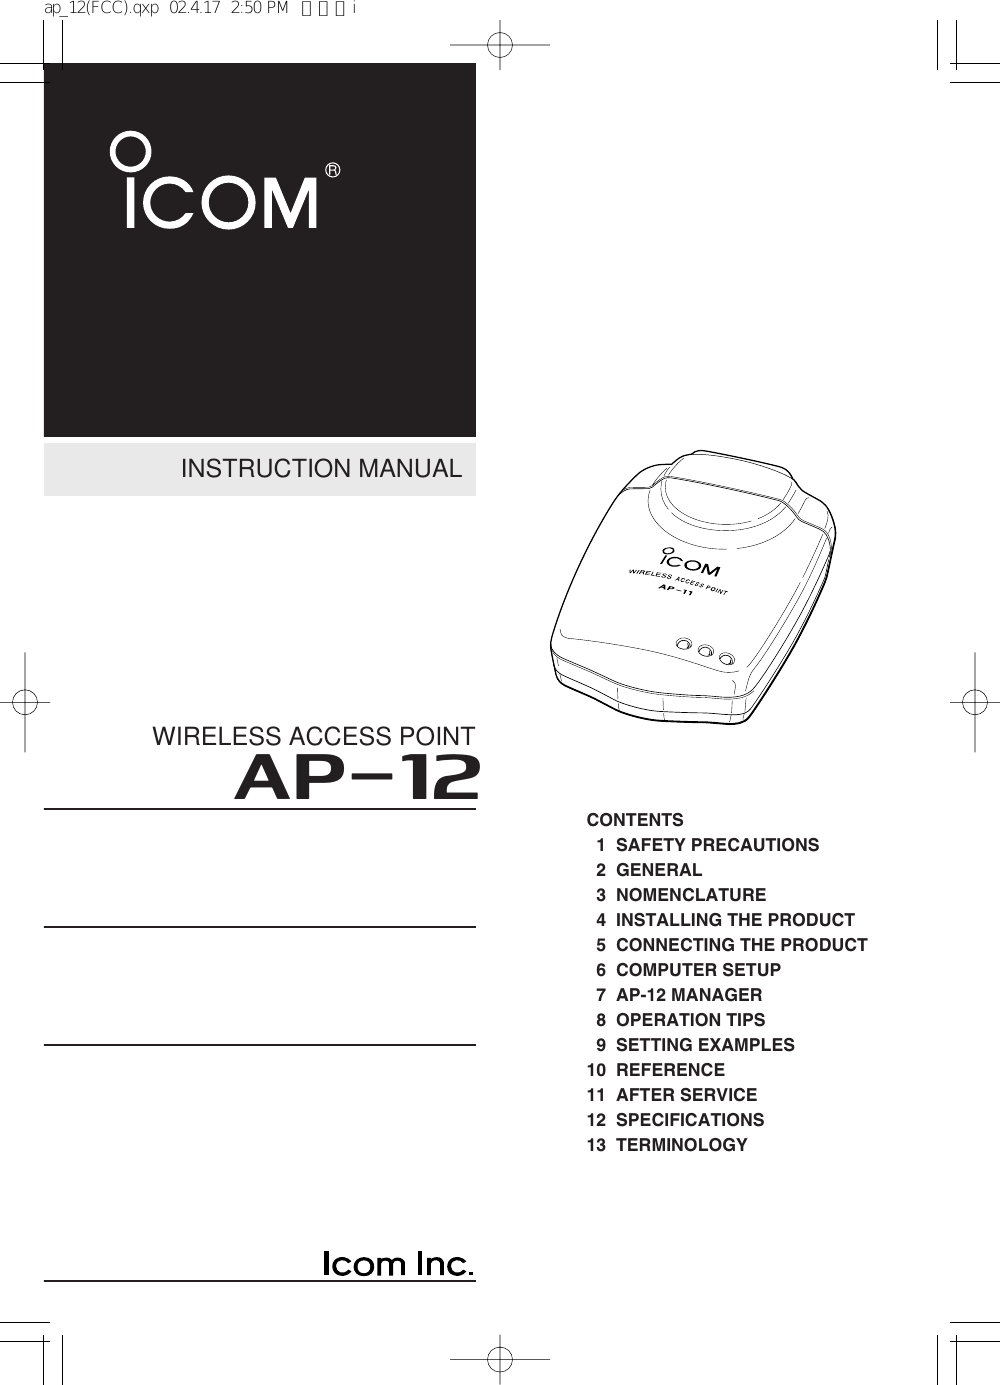 INSTRUCTION MANUALWIRELESS ACCESS POINTAP-12CONTENTS1 SAFETY PRECAUTIONS2 GENERAL3 NOMENCLATURE4 INSTALLING THE PRODUCT5 CONNECTING THE PRODUCT6 COMPUTER SETUP7 AP-12 MANAGER8 OPERATION TIPS9 SETTING EXAMPLES10 REFERENCE11 AFTER SERVICE12 SPECIFICATIONS13 TERMINOLOGYap_12(FCC).qxp  02.4.17  2:50 PM  ページi